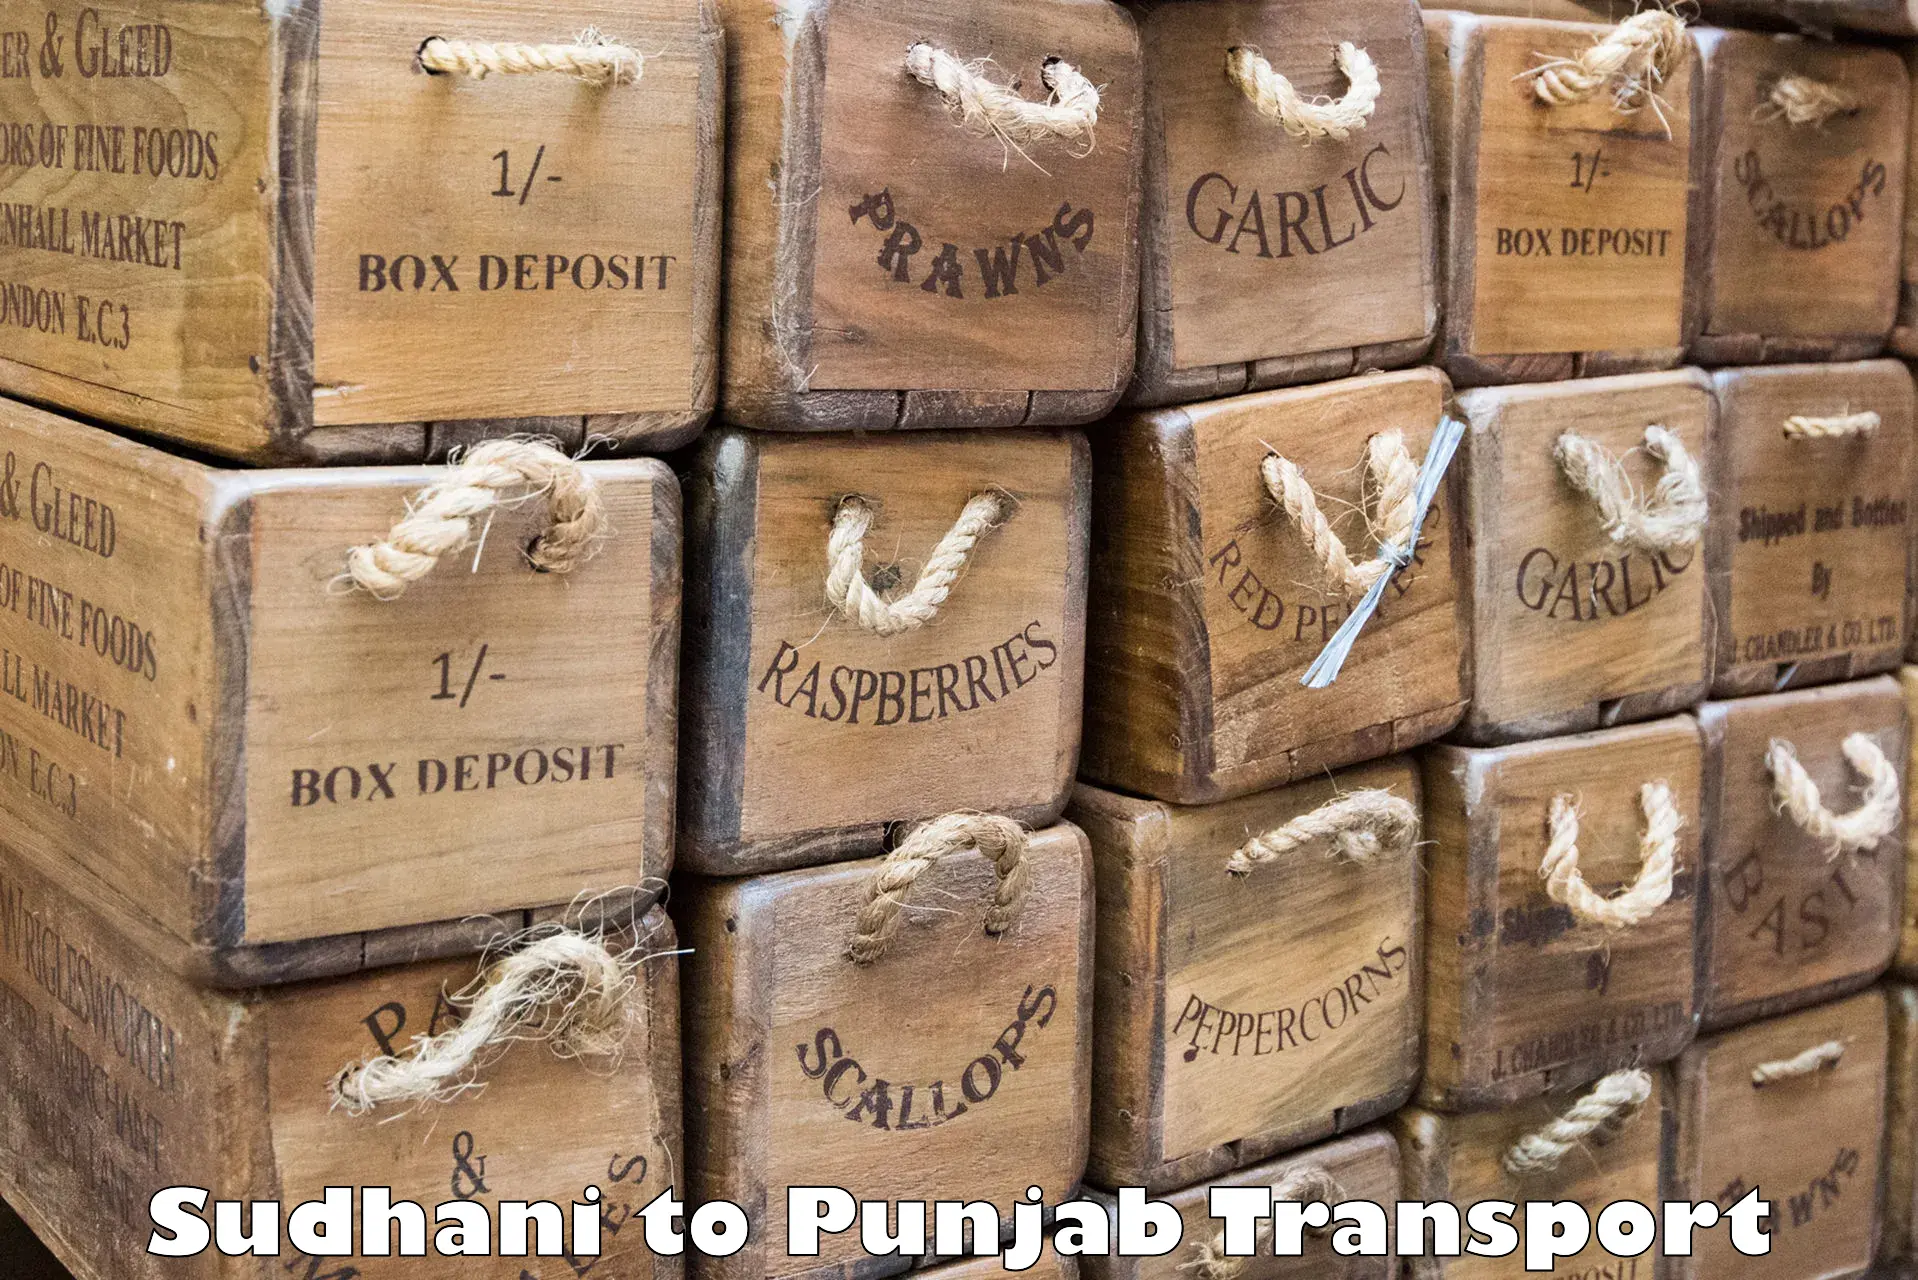 Commercial transport service Sudhani to Punjab